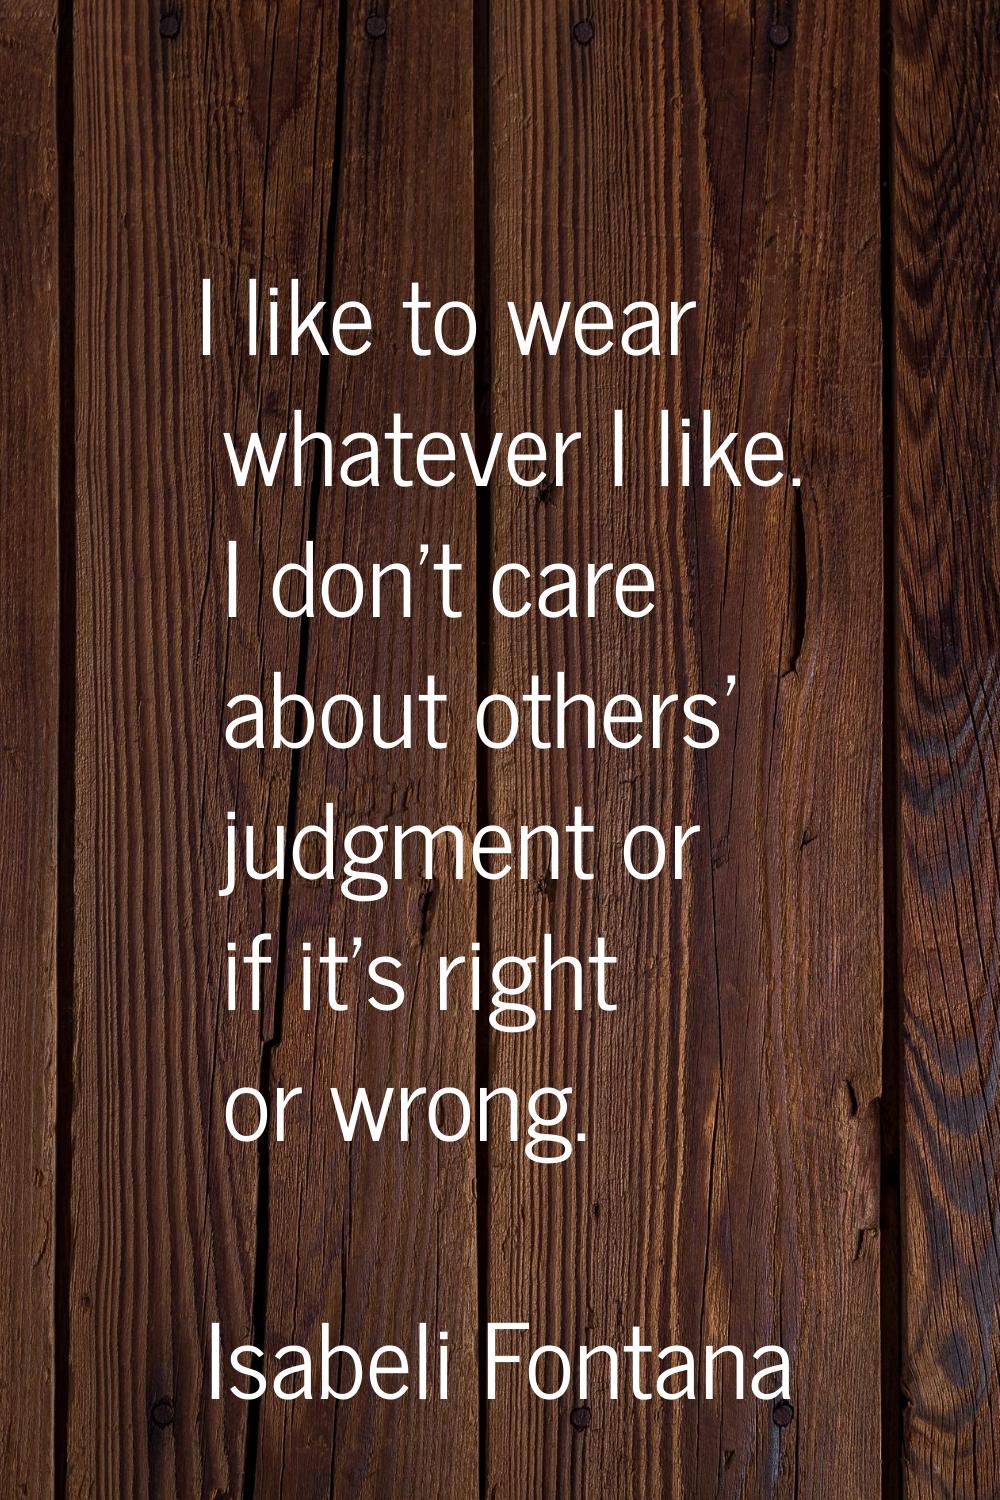 I like to wear whatever I like. I don't care about others' judgment or if it's right or wrong.